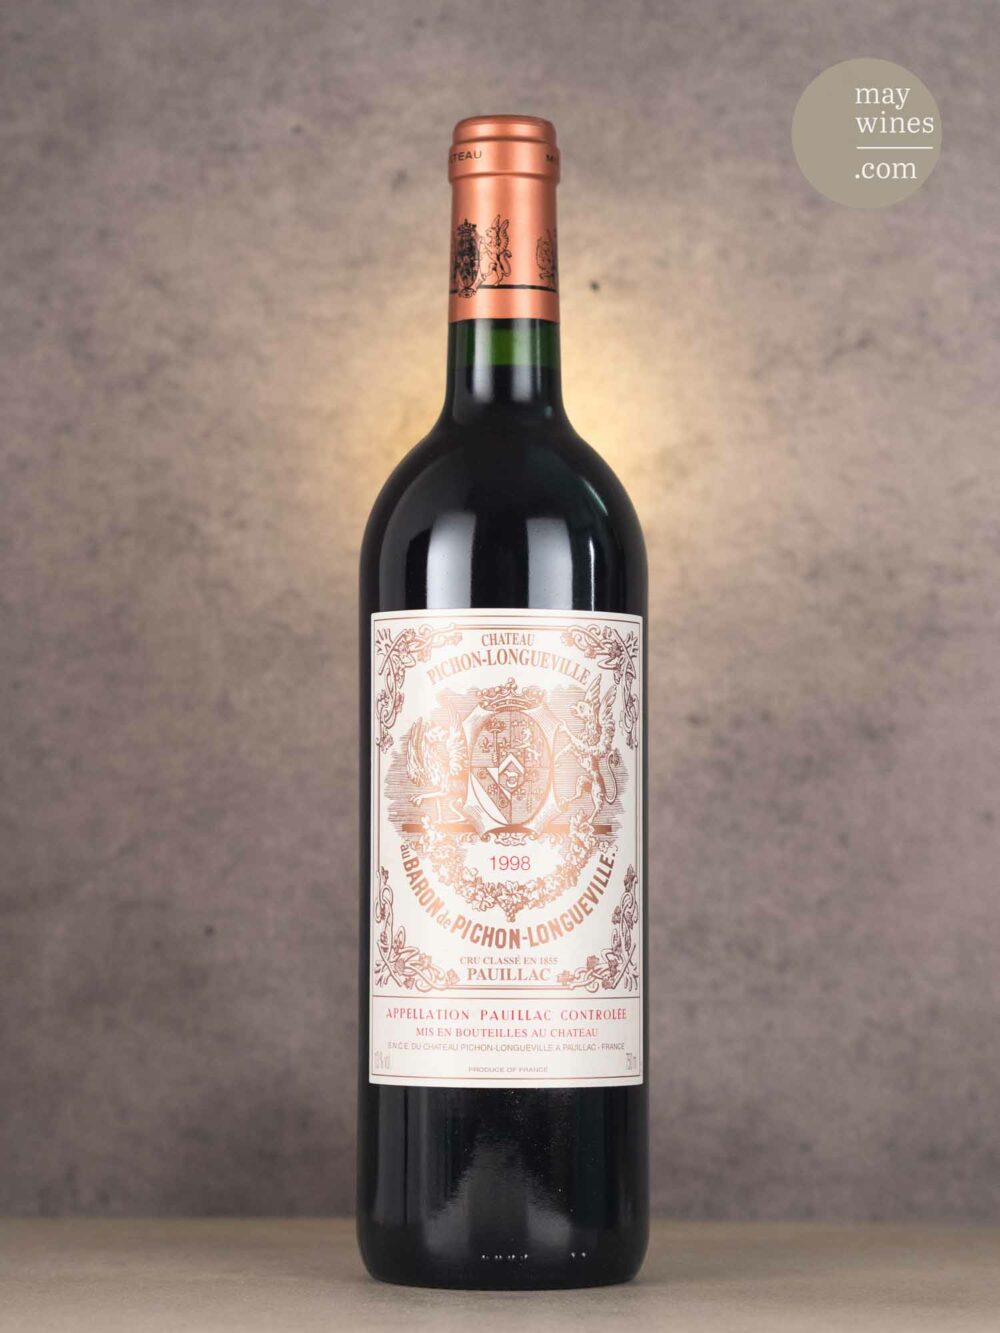 May Wines – Rotwein – 1998 Château Pichon Baron